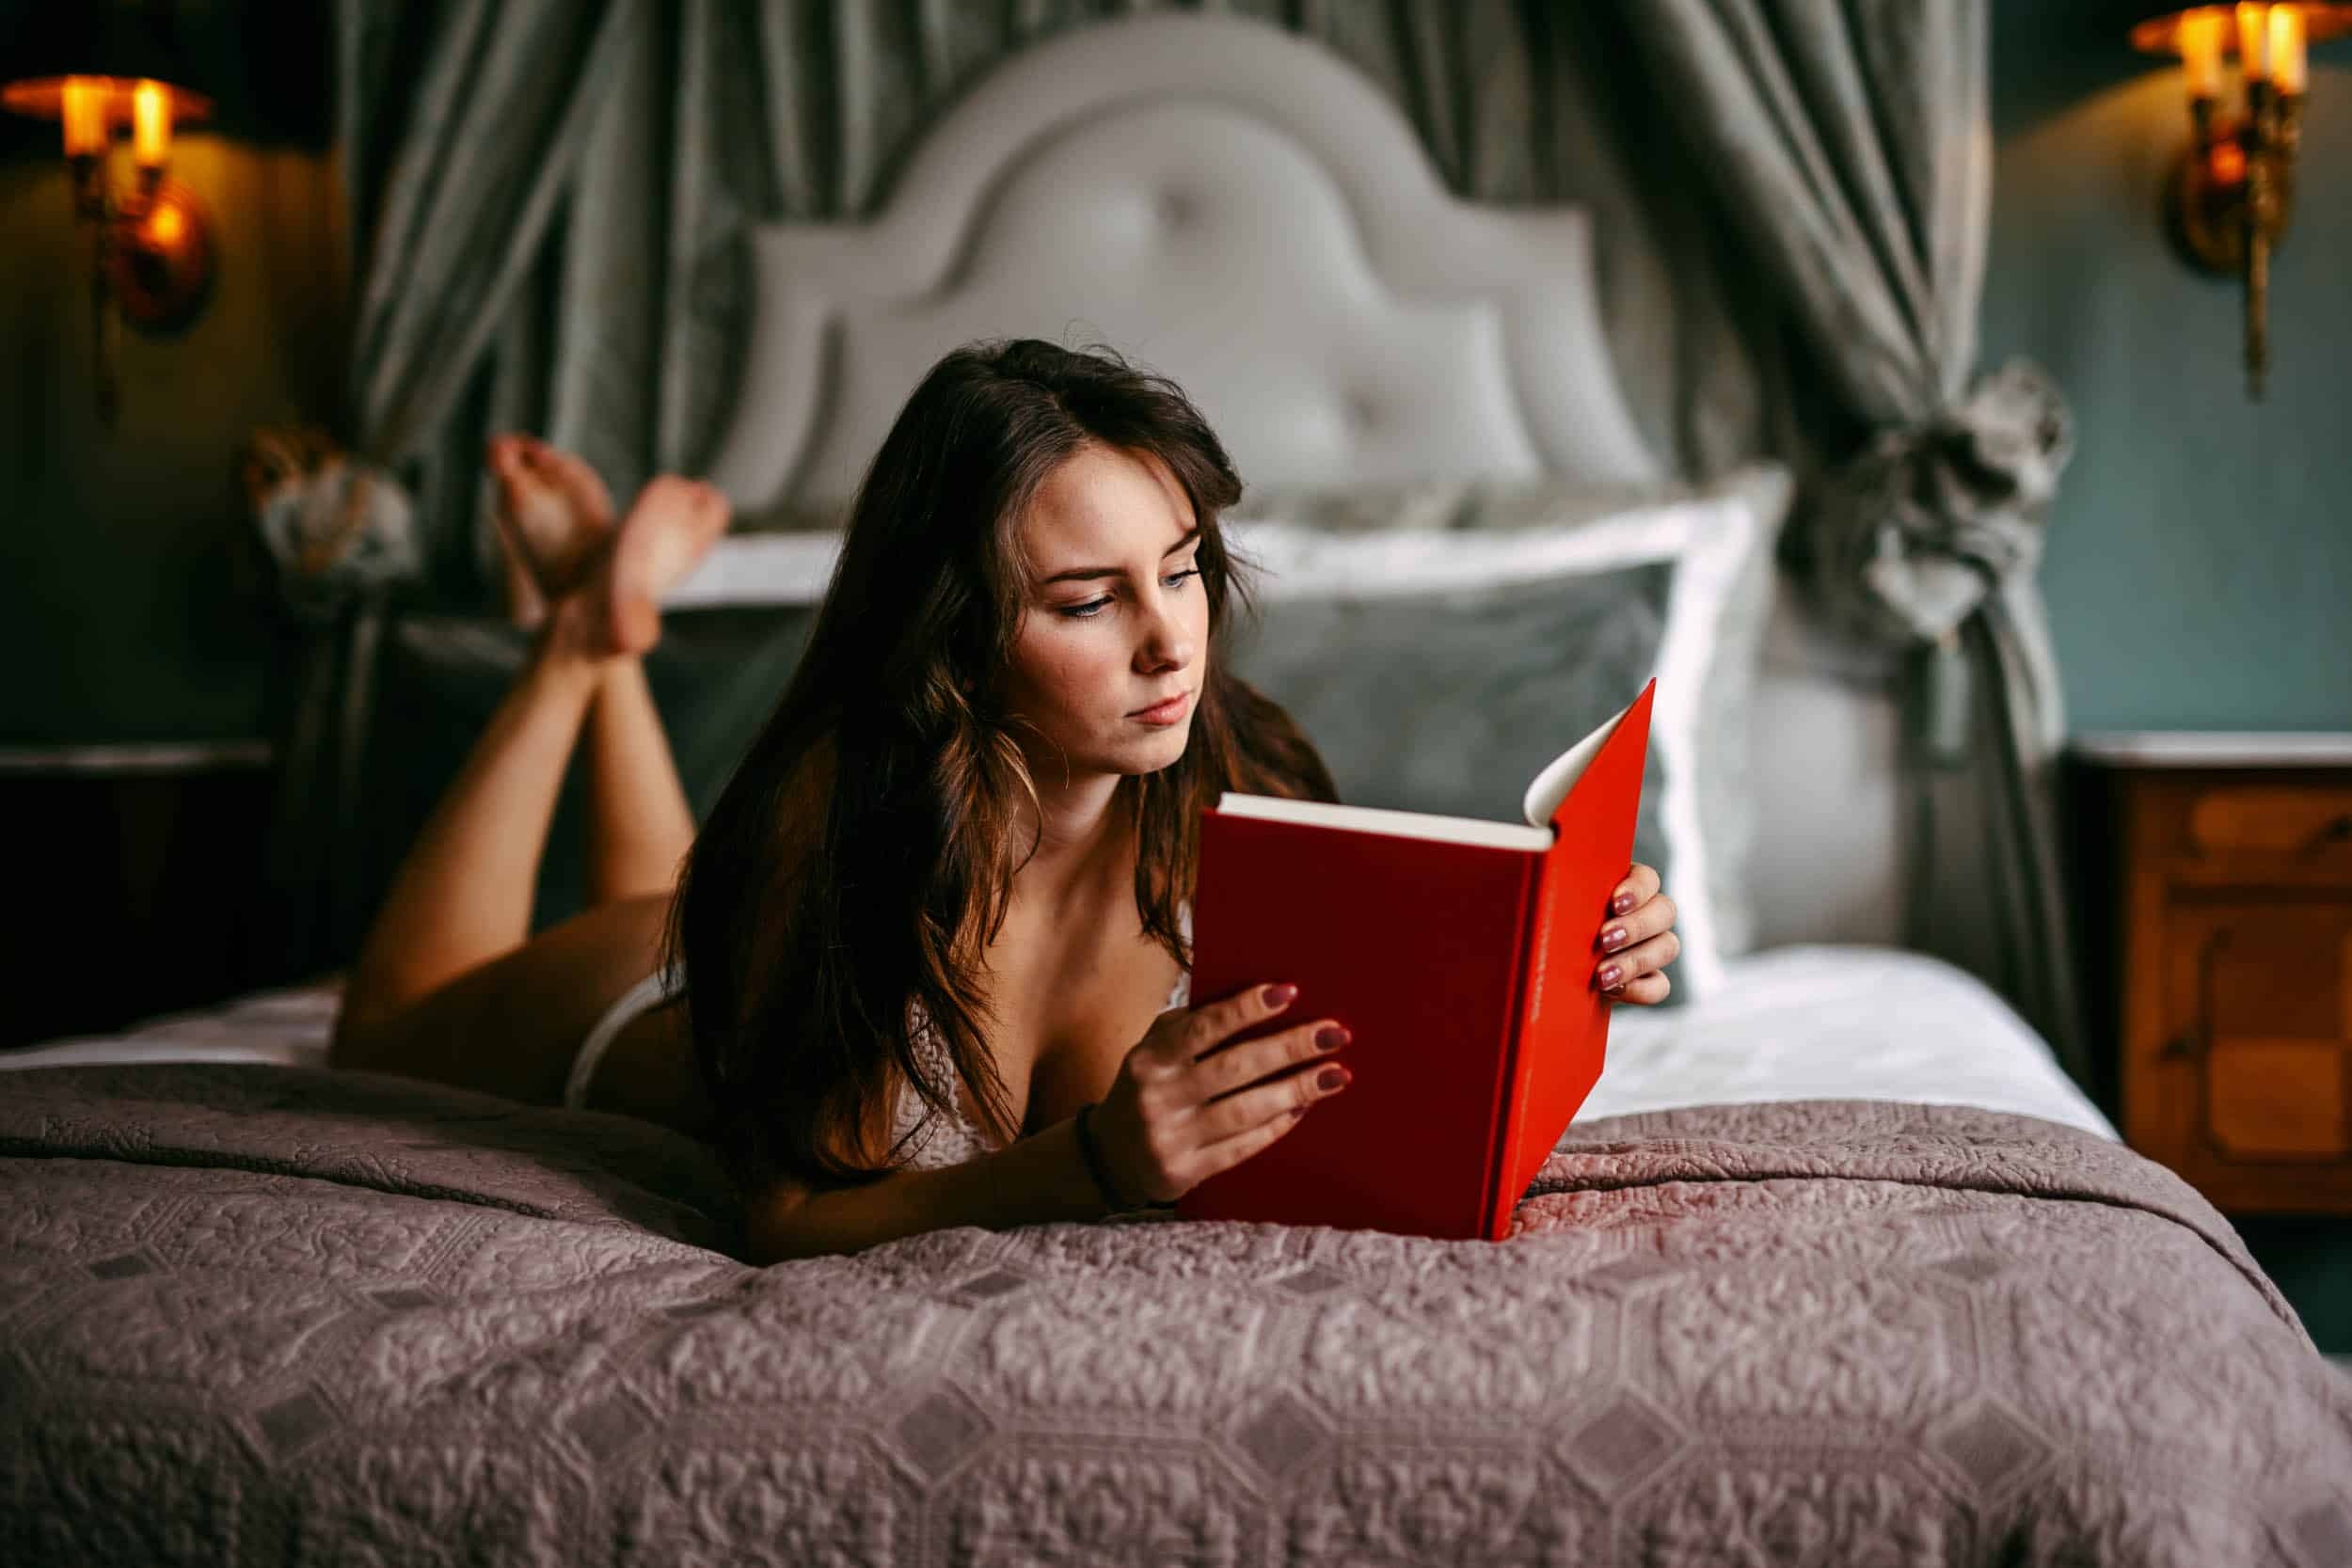 A woman lying on bed reading a book in a boudoir.